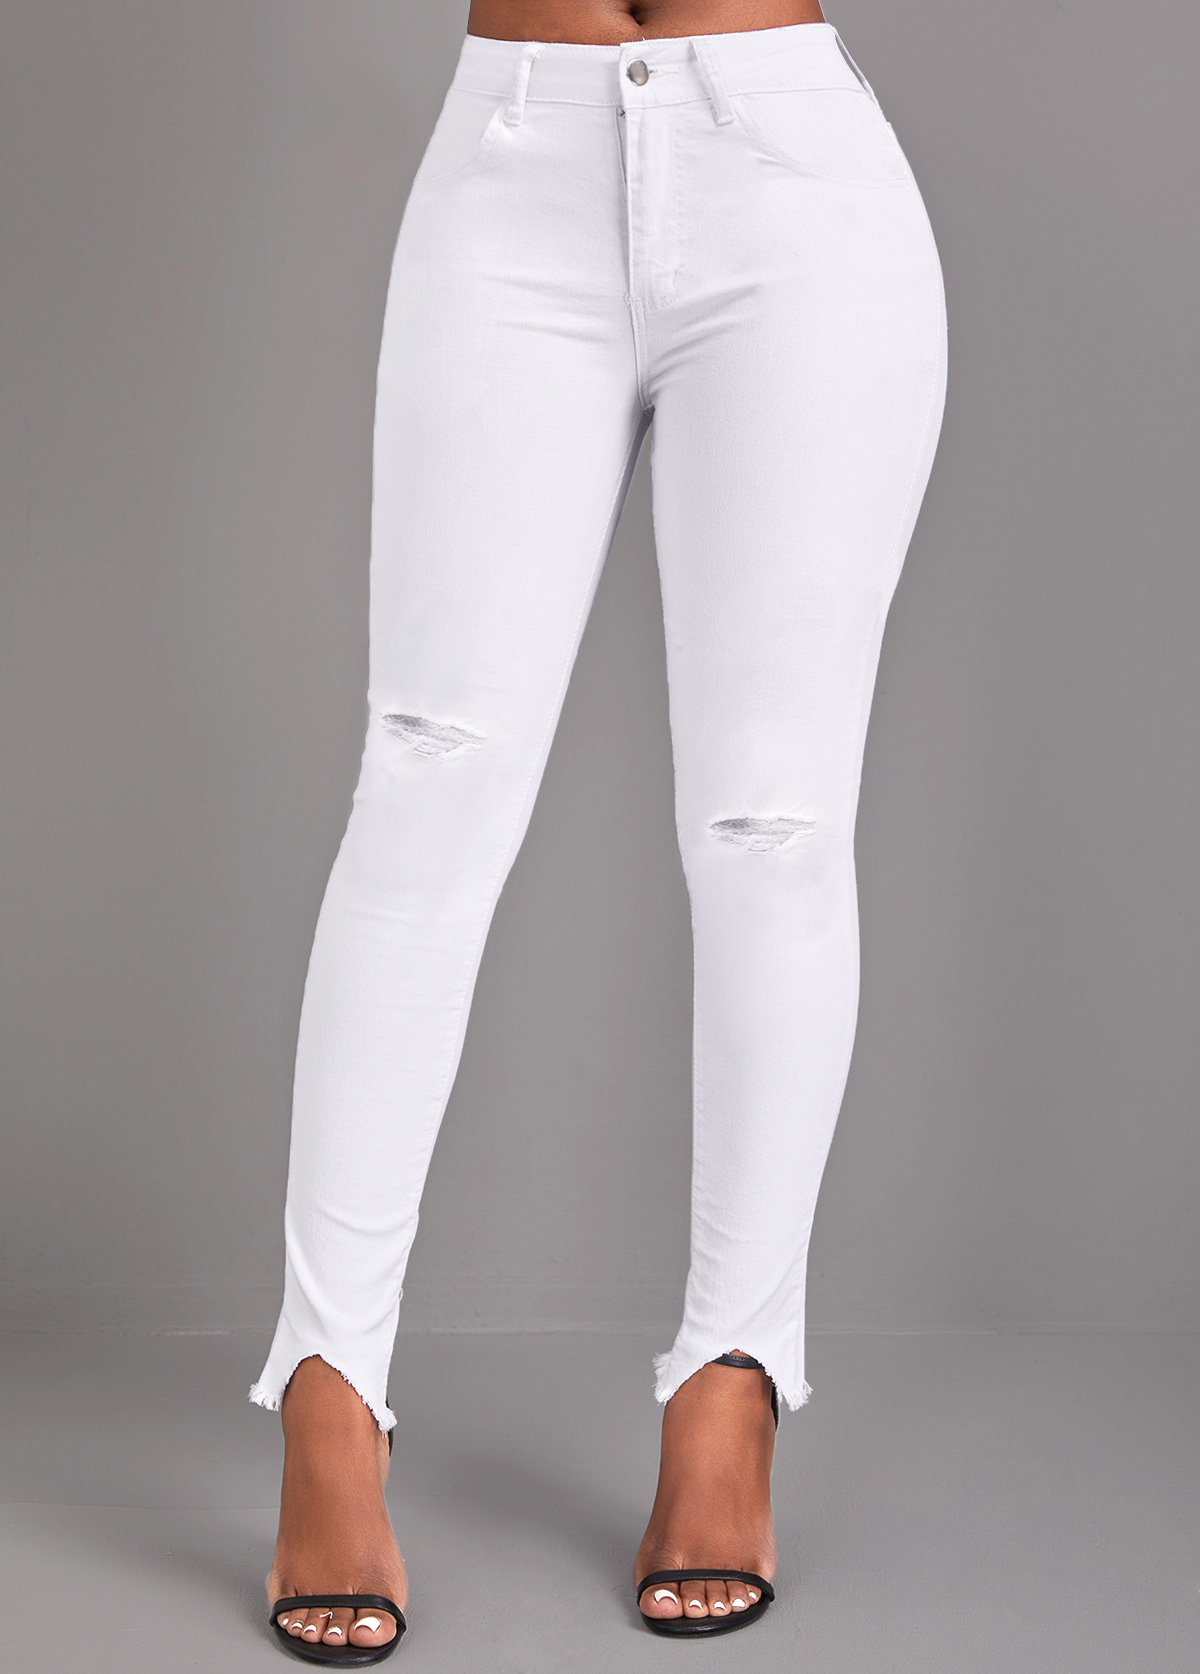 Button White High Waisted Skinny Jeans | Rosewe.com - USD $26.98